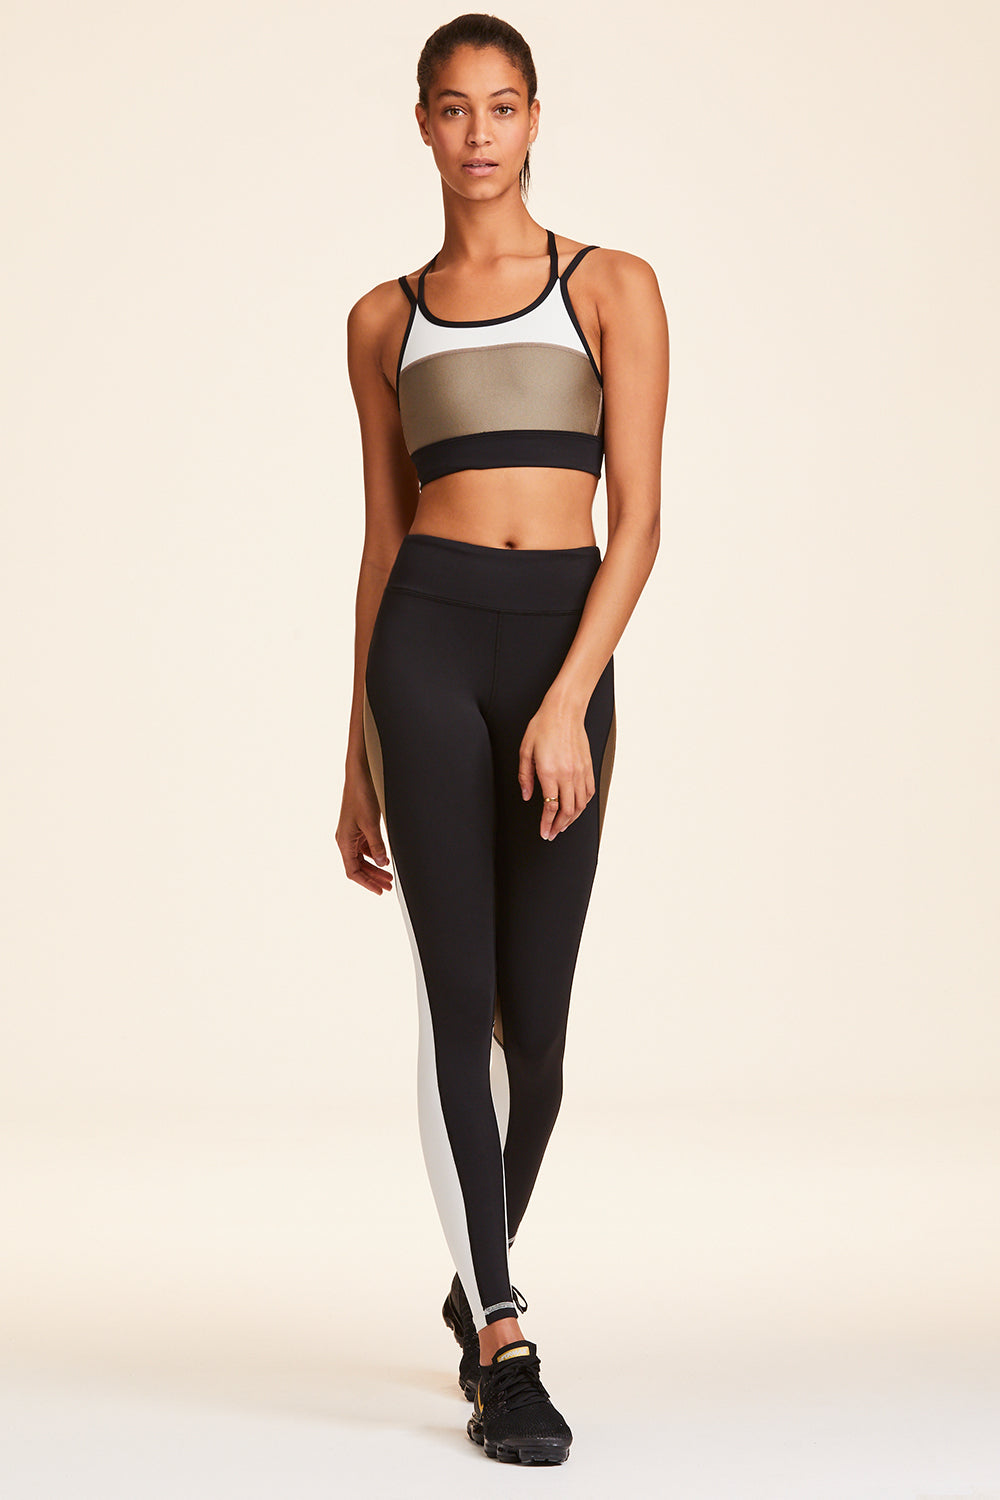 Full frontal view of Alala Women's Luxury Athleisure blocked sports bra with criss-crossed straps in gold, white, & black